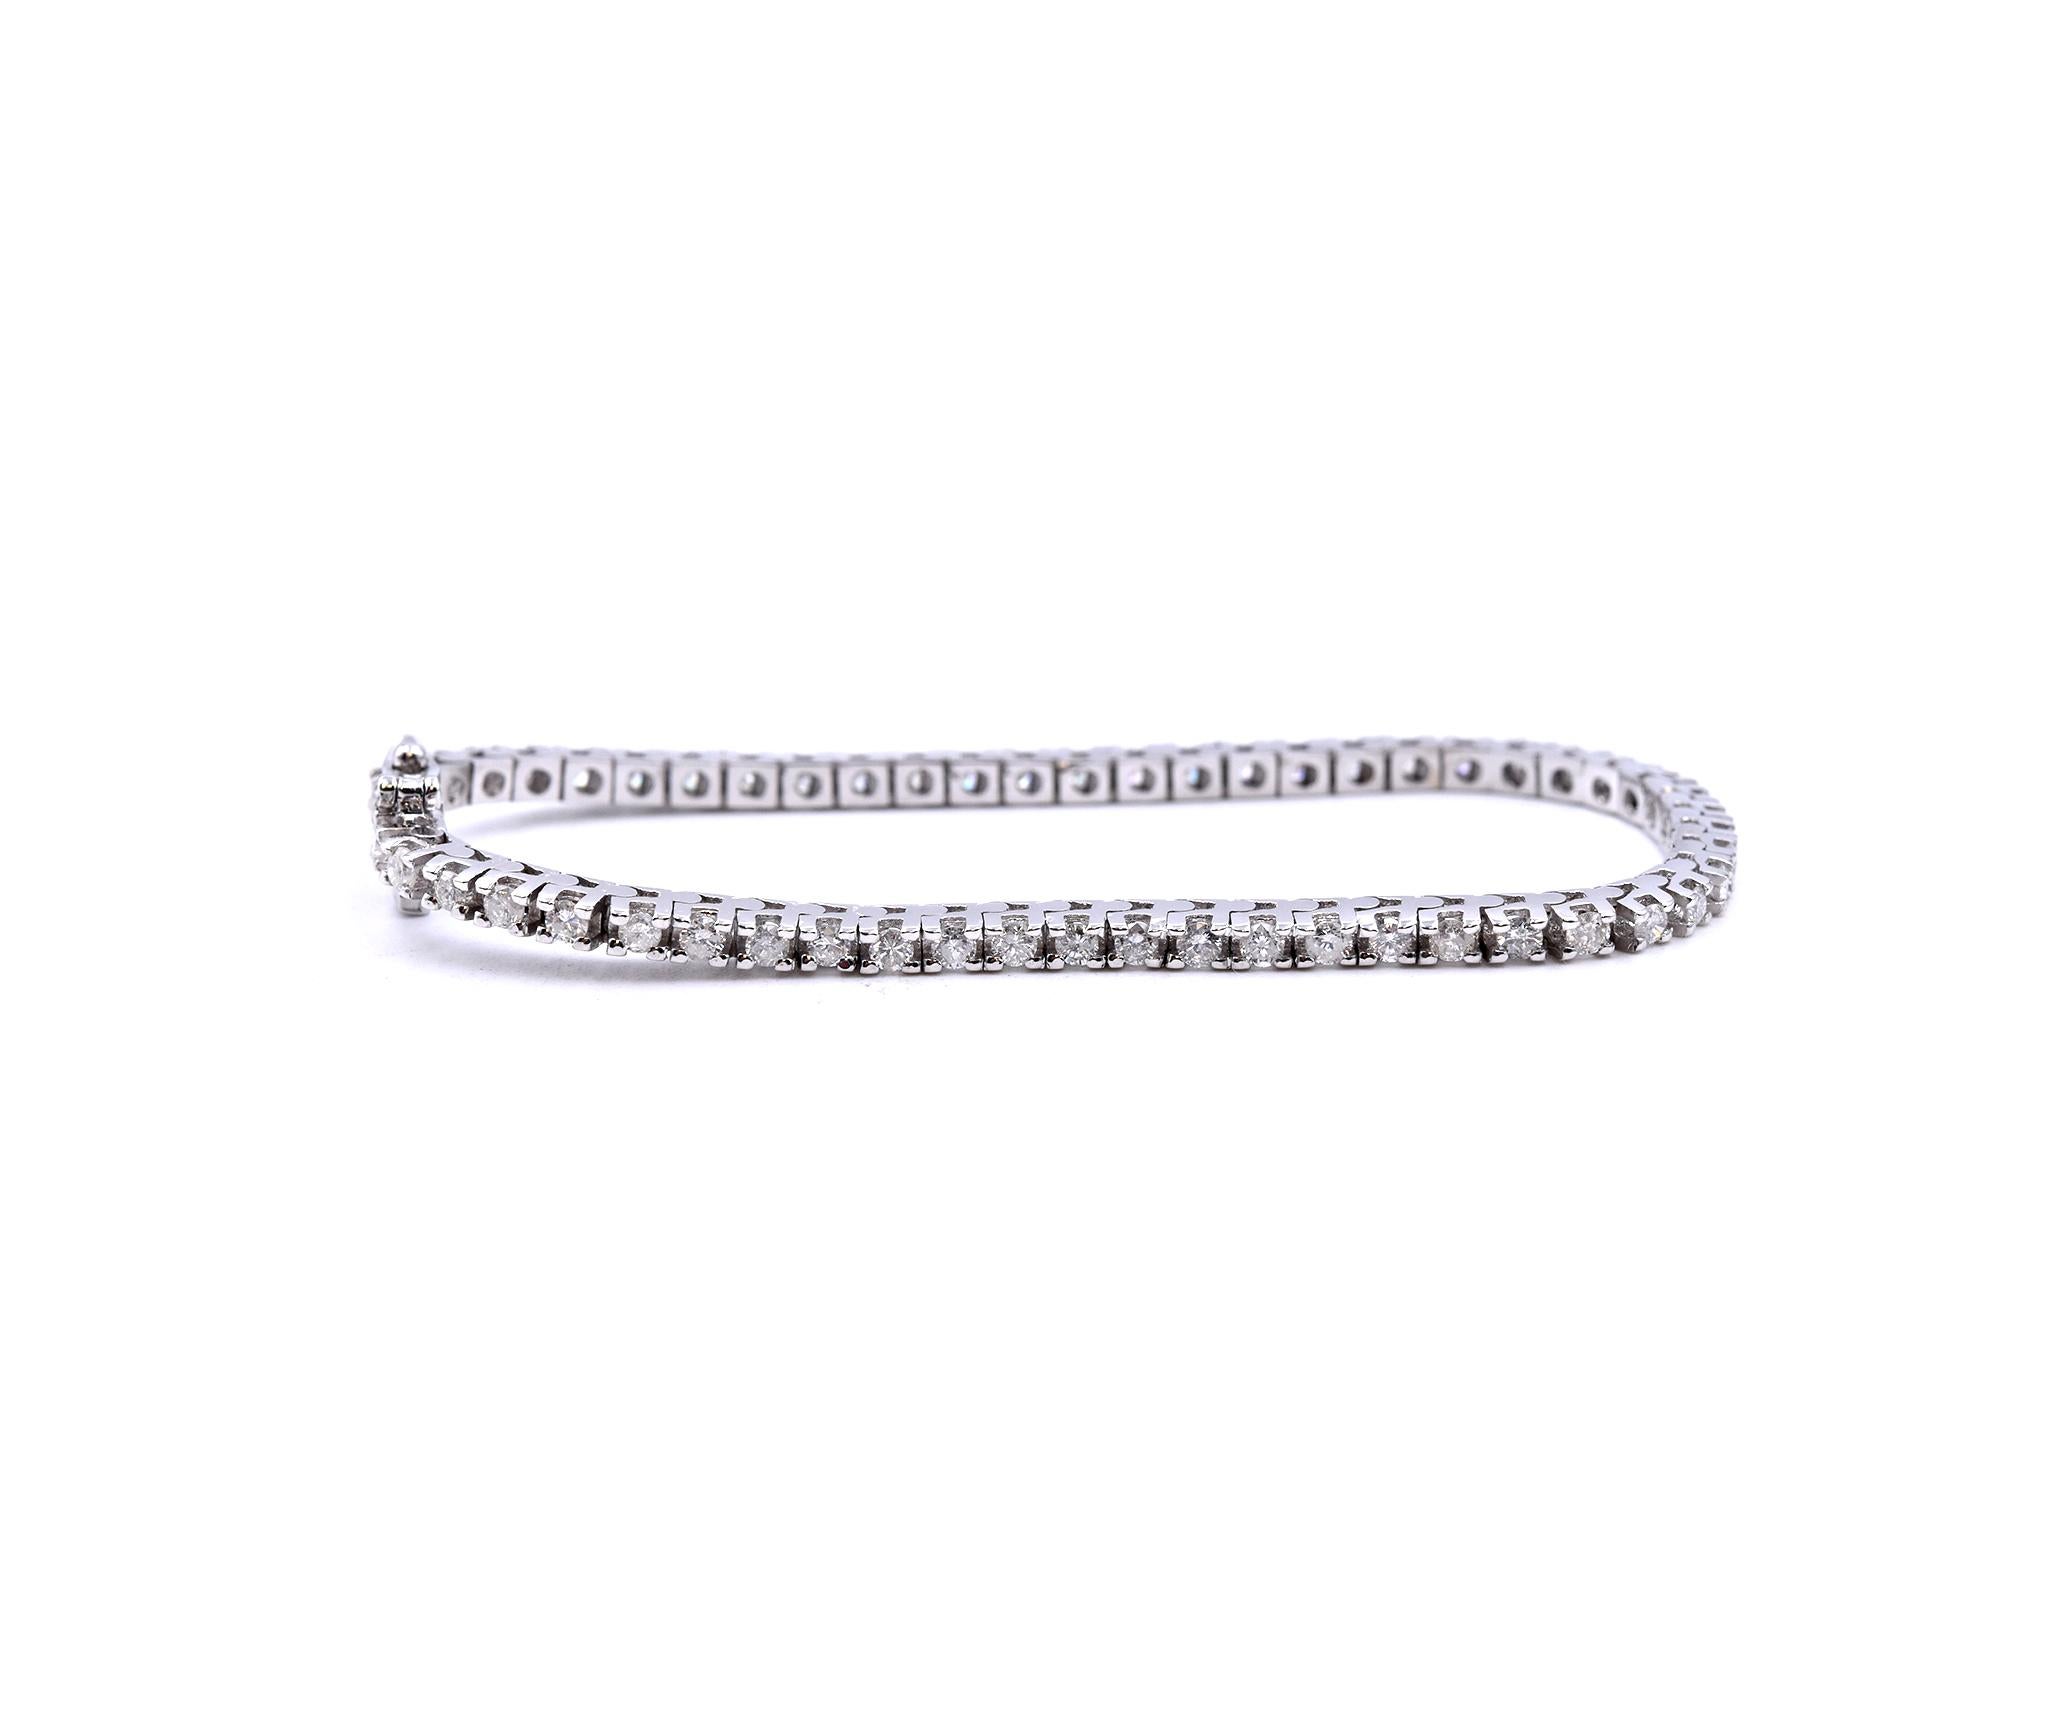 Designer: custom
Material: 14K white gold
Round Diamonds: 55 round brilliant cuts = 2.25cttw
Color: G
Clarity: SI3
Dimensions: the bracelet measures 7-inches in length 
Weight: 12.1 grams